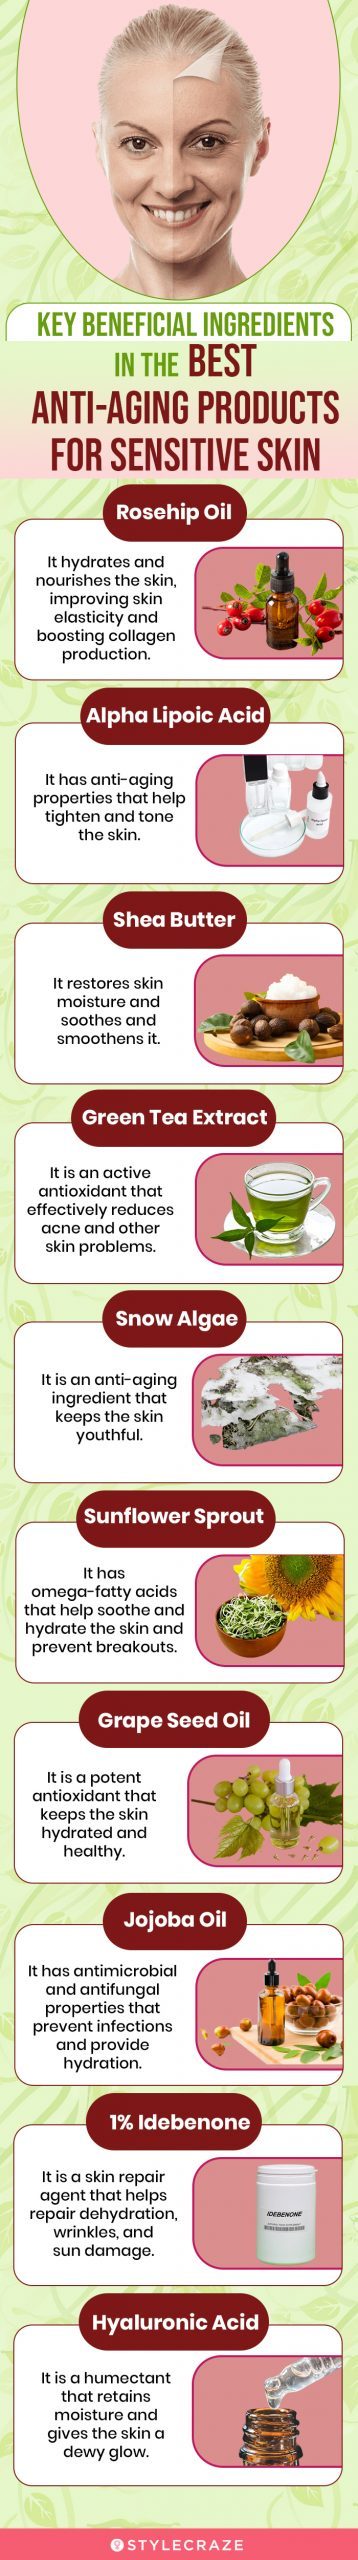 Key Beneficial Ingredients In The Best Anti-Aging Products For Sensitive Skin (infographic)